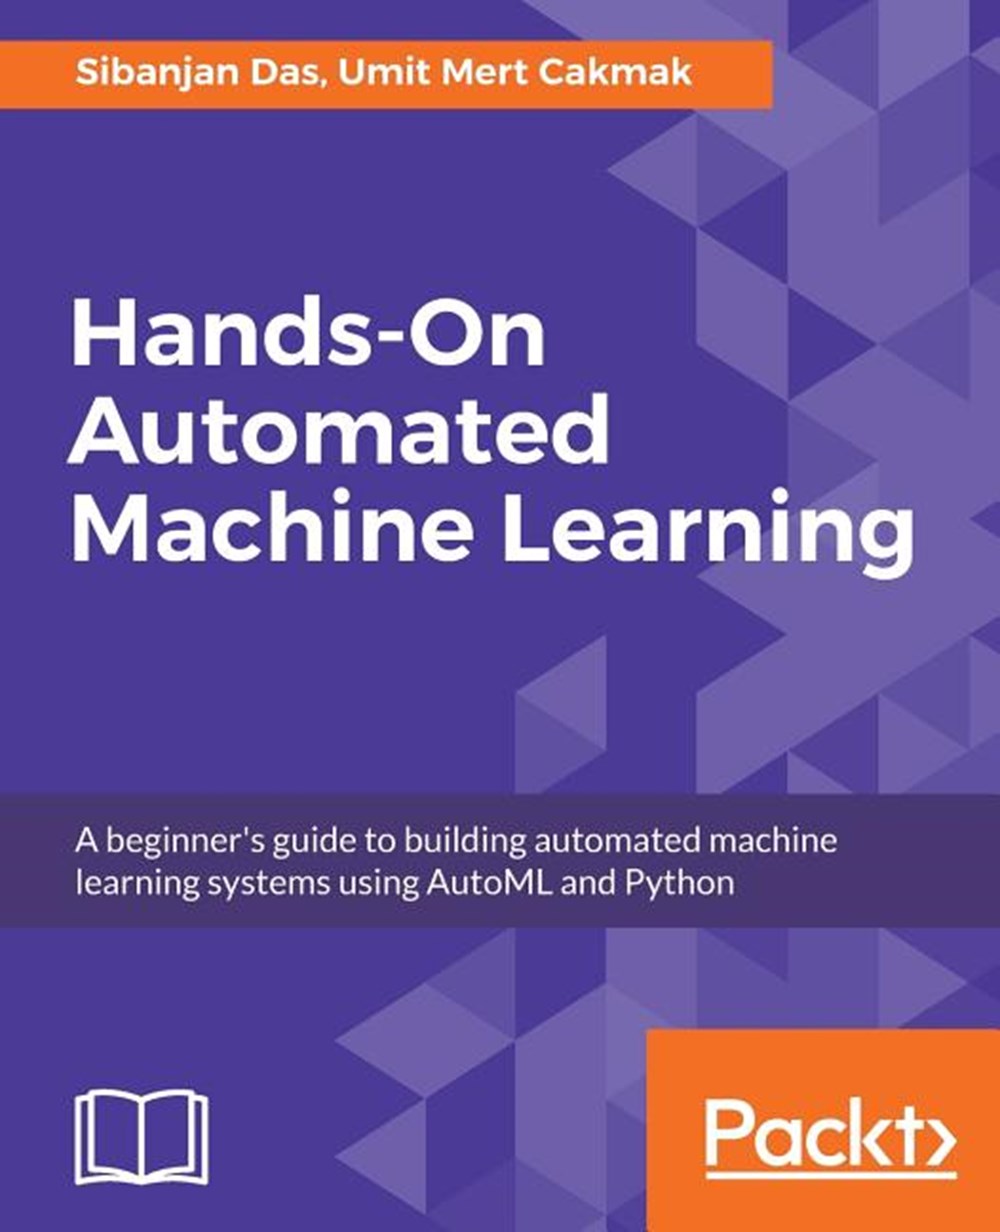 Hands-On Automated Machine Learning